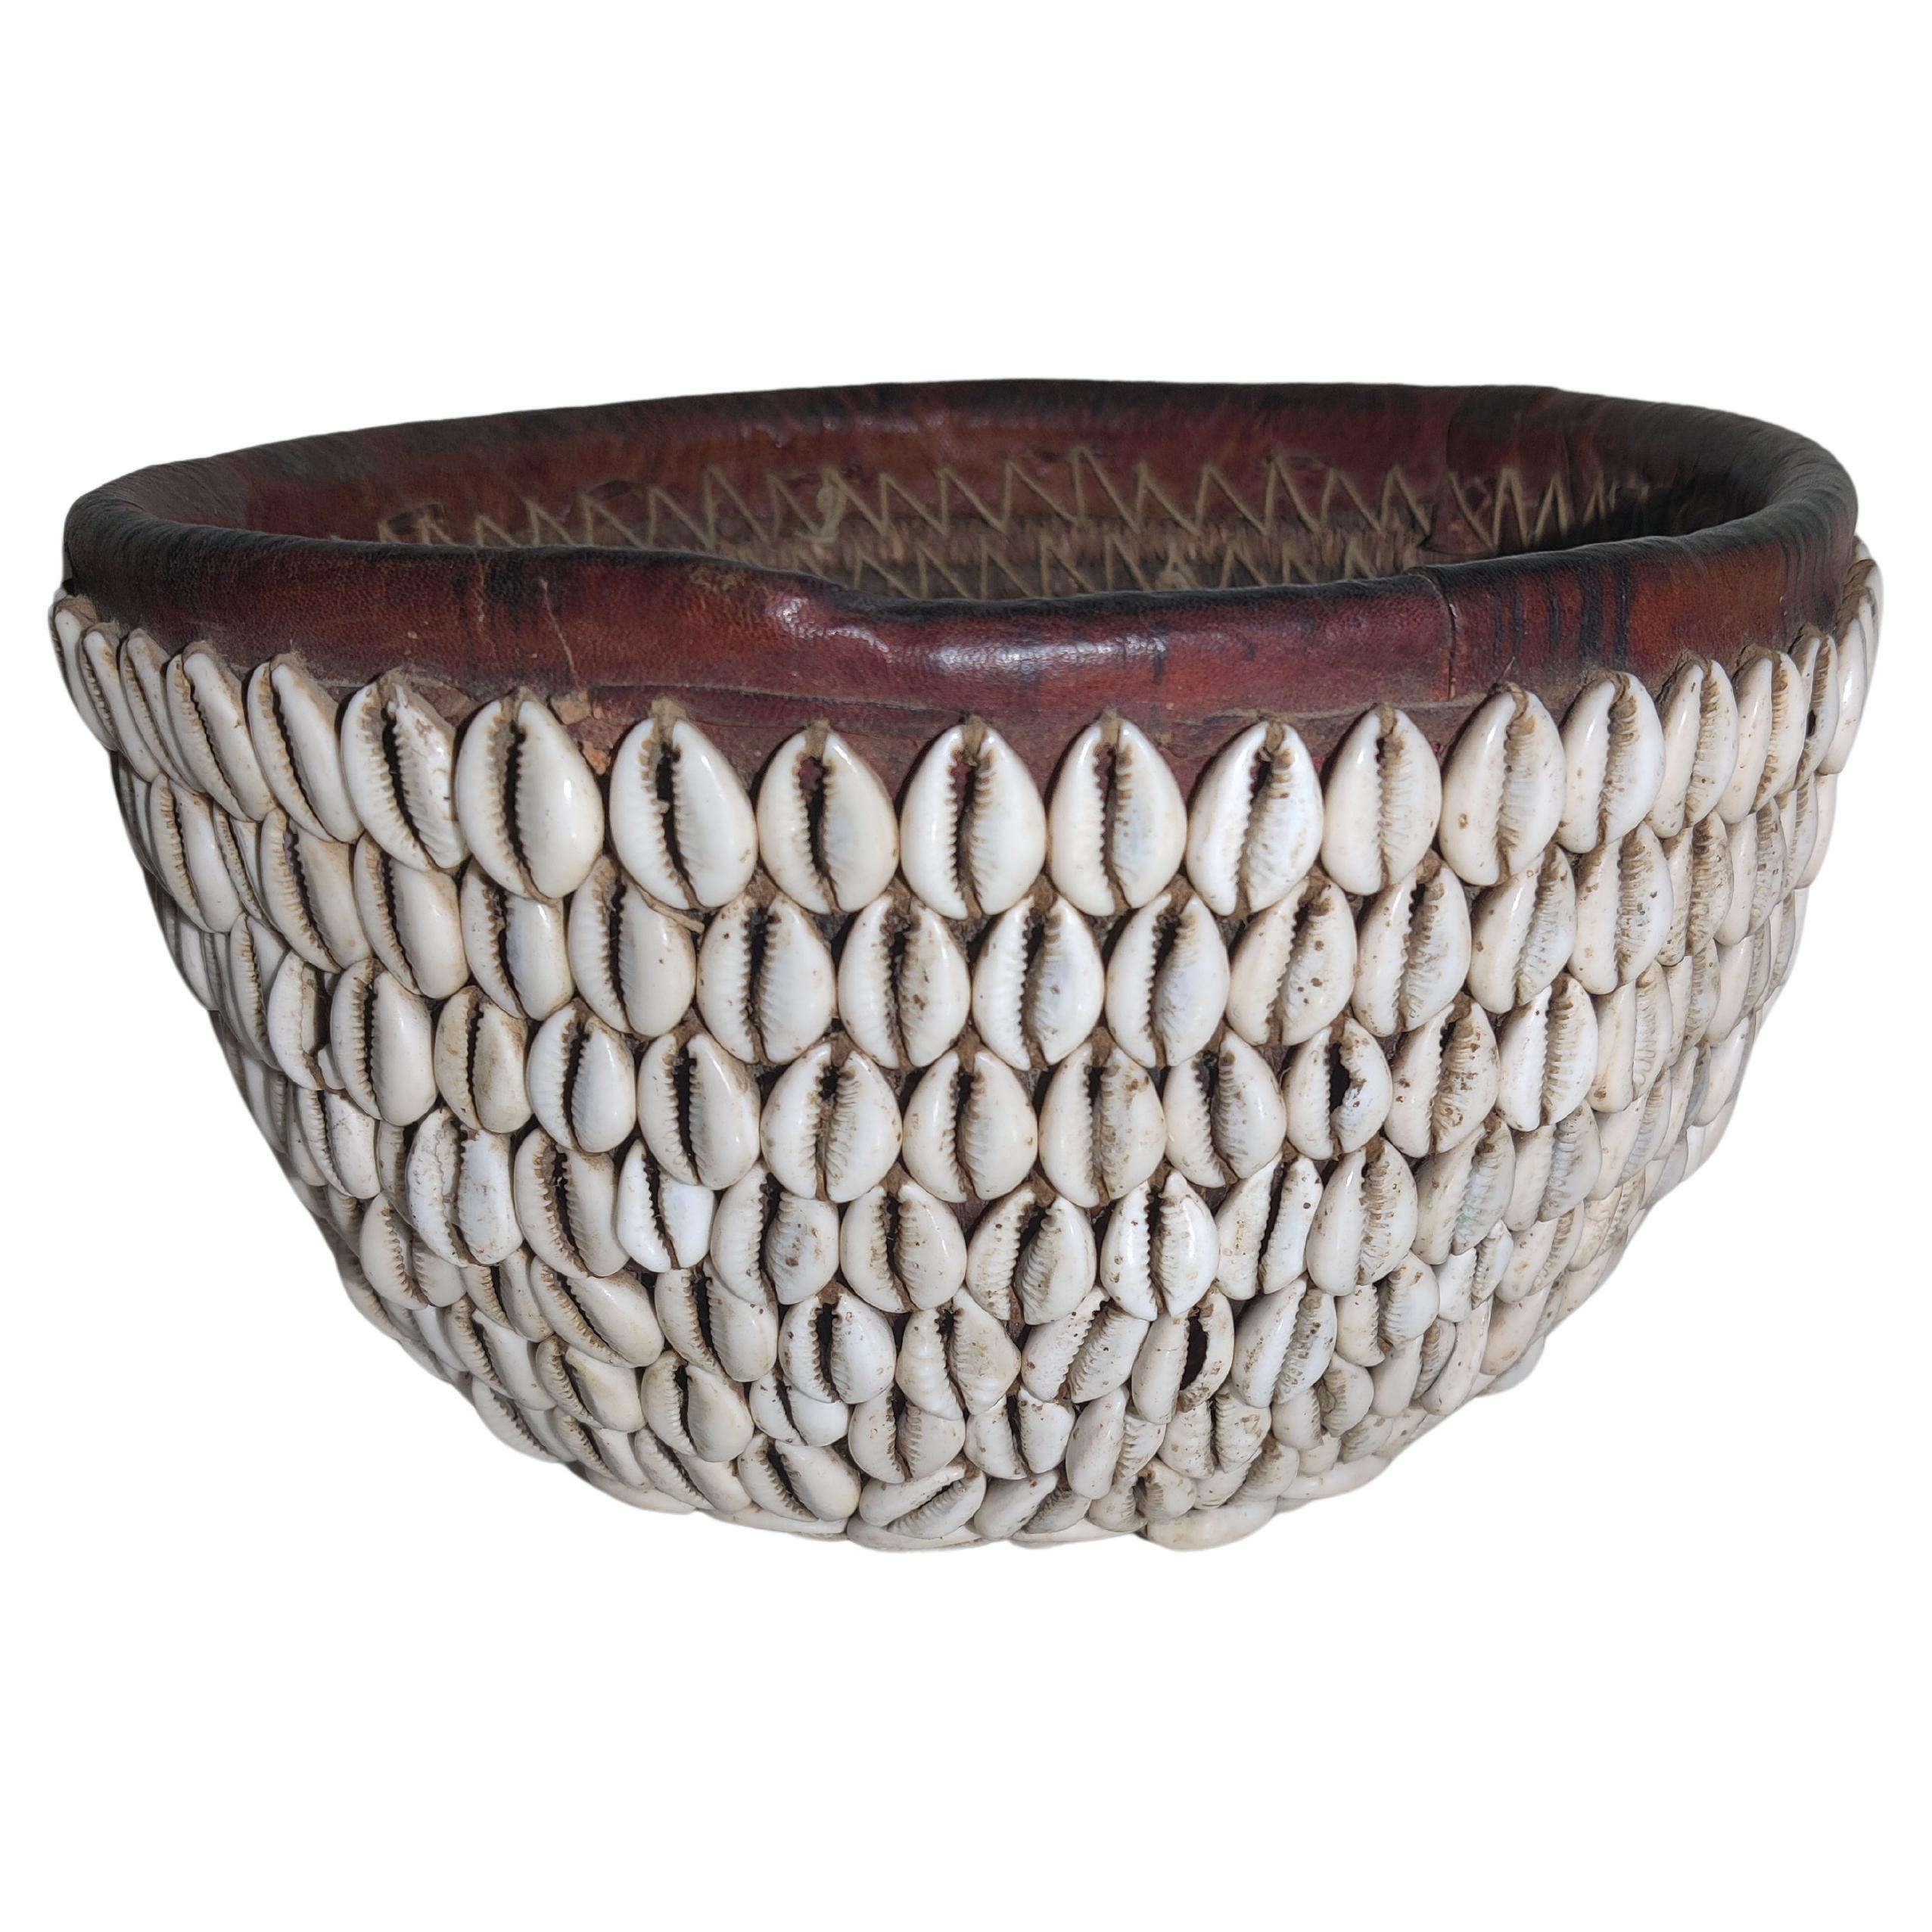 Vintage Hand-crafted Basket with Cowrie Shells